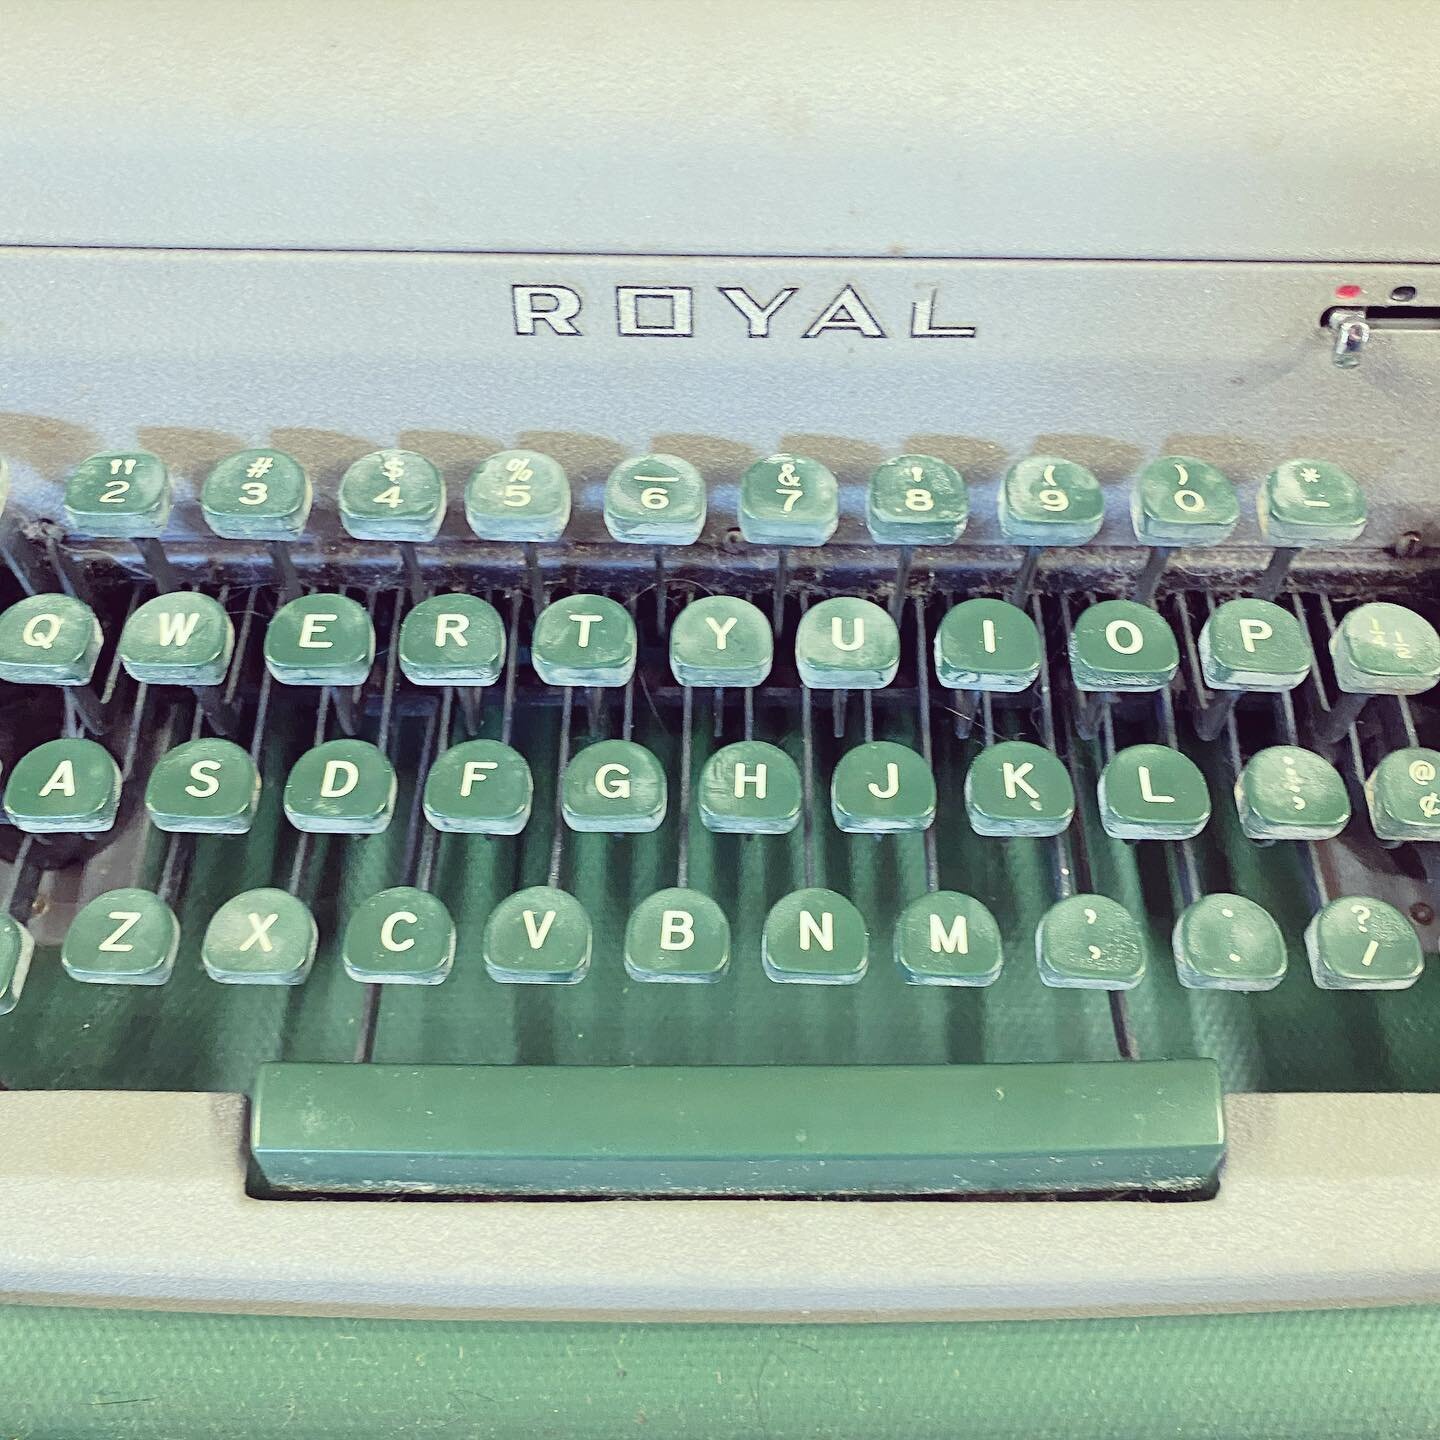 Happy July! Here&rsquo;s a cool old mint-green typewriter, just because. We&rsquo;re excited to start sharing more about our new fall books, so stay tuned!

#amwriting #amreading #weekendvibes #vintagetypewriter #summerbreak #booksbooksbooks #juneroa